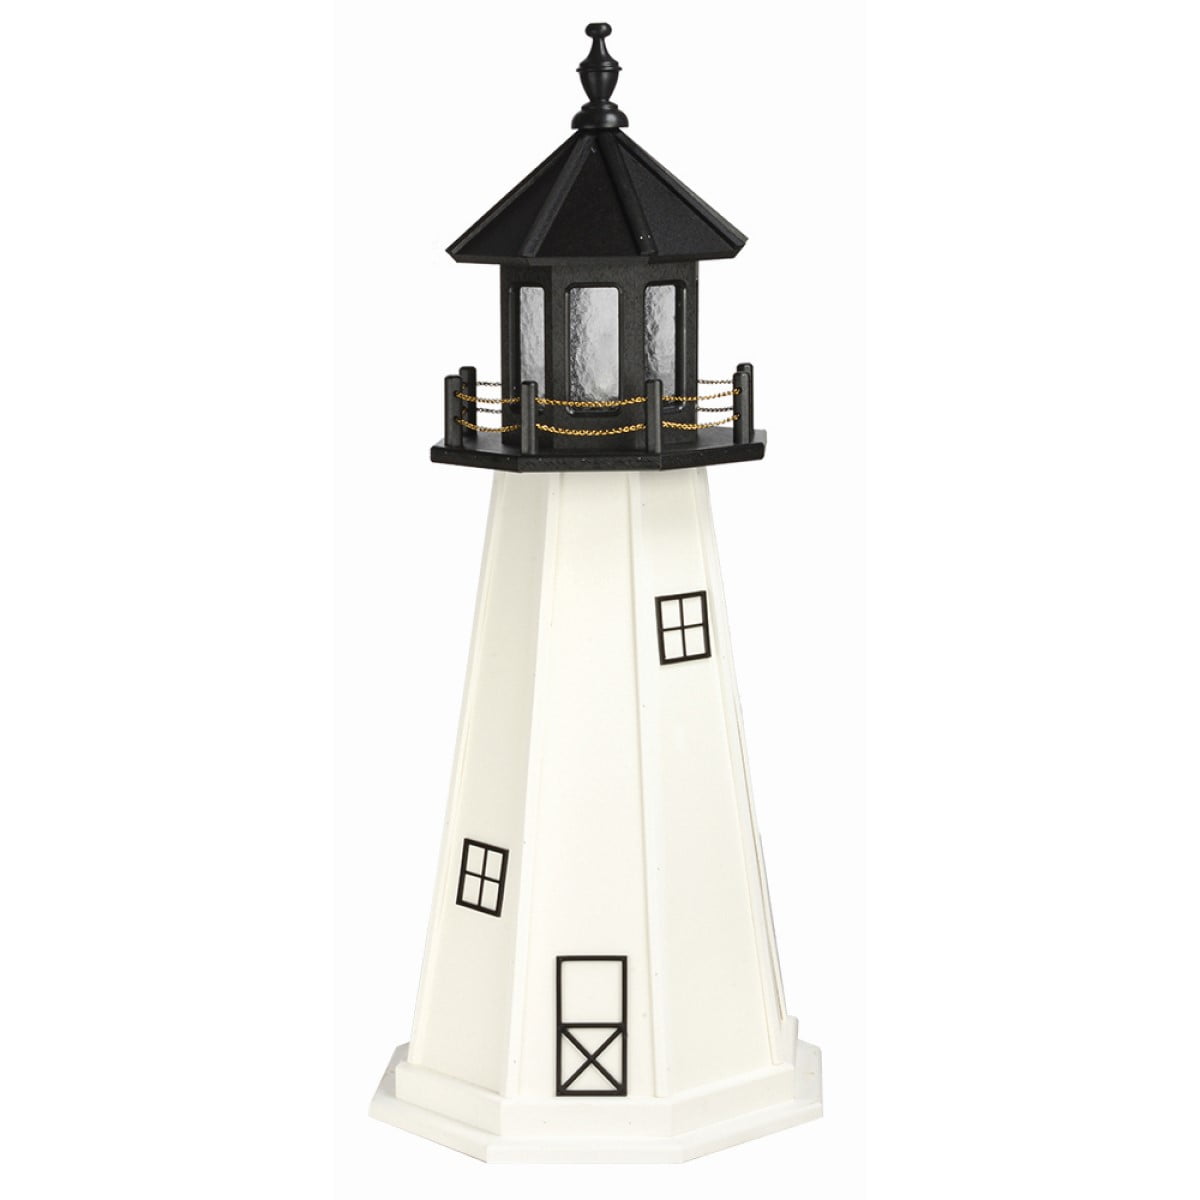 Beaver Dam Woodworks Cape Cod Poly Lumber Lighthouse-Multiple Sizes